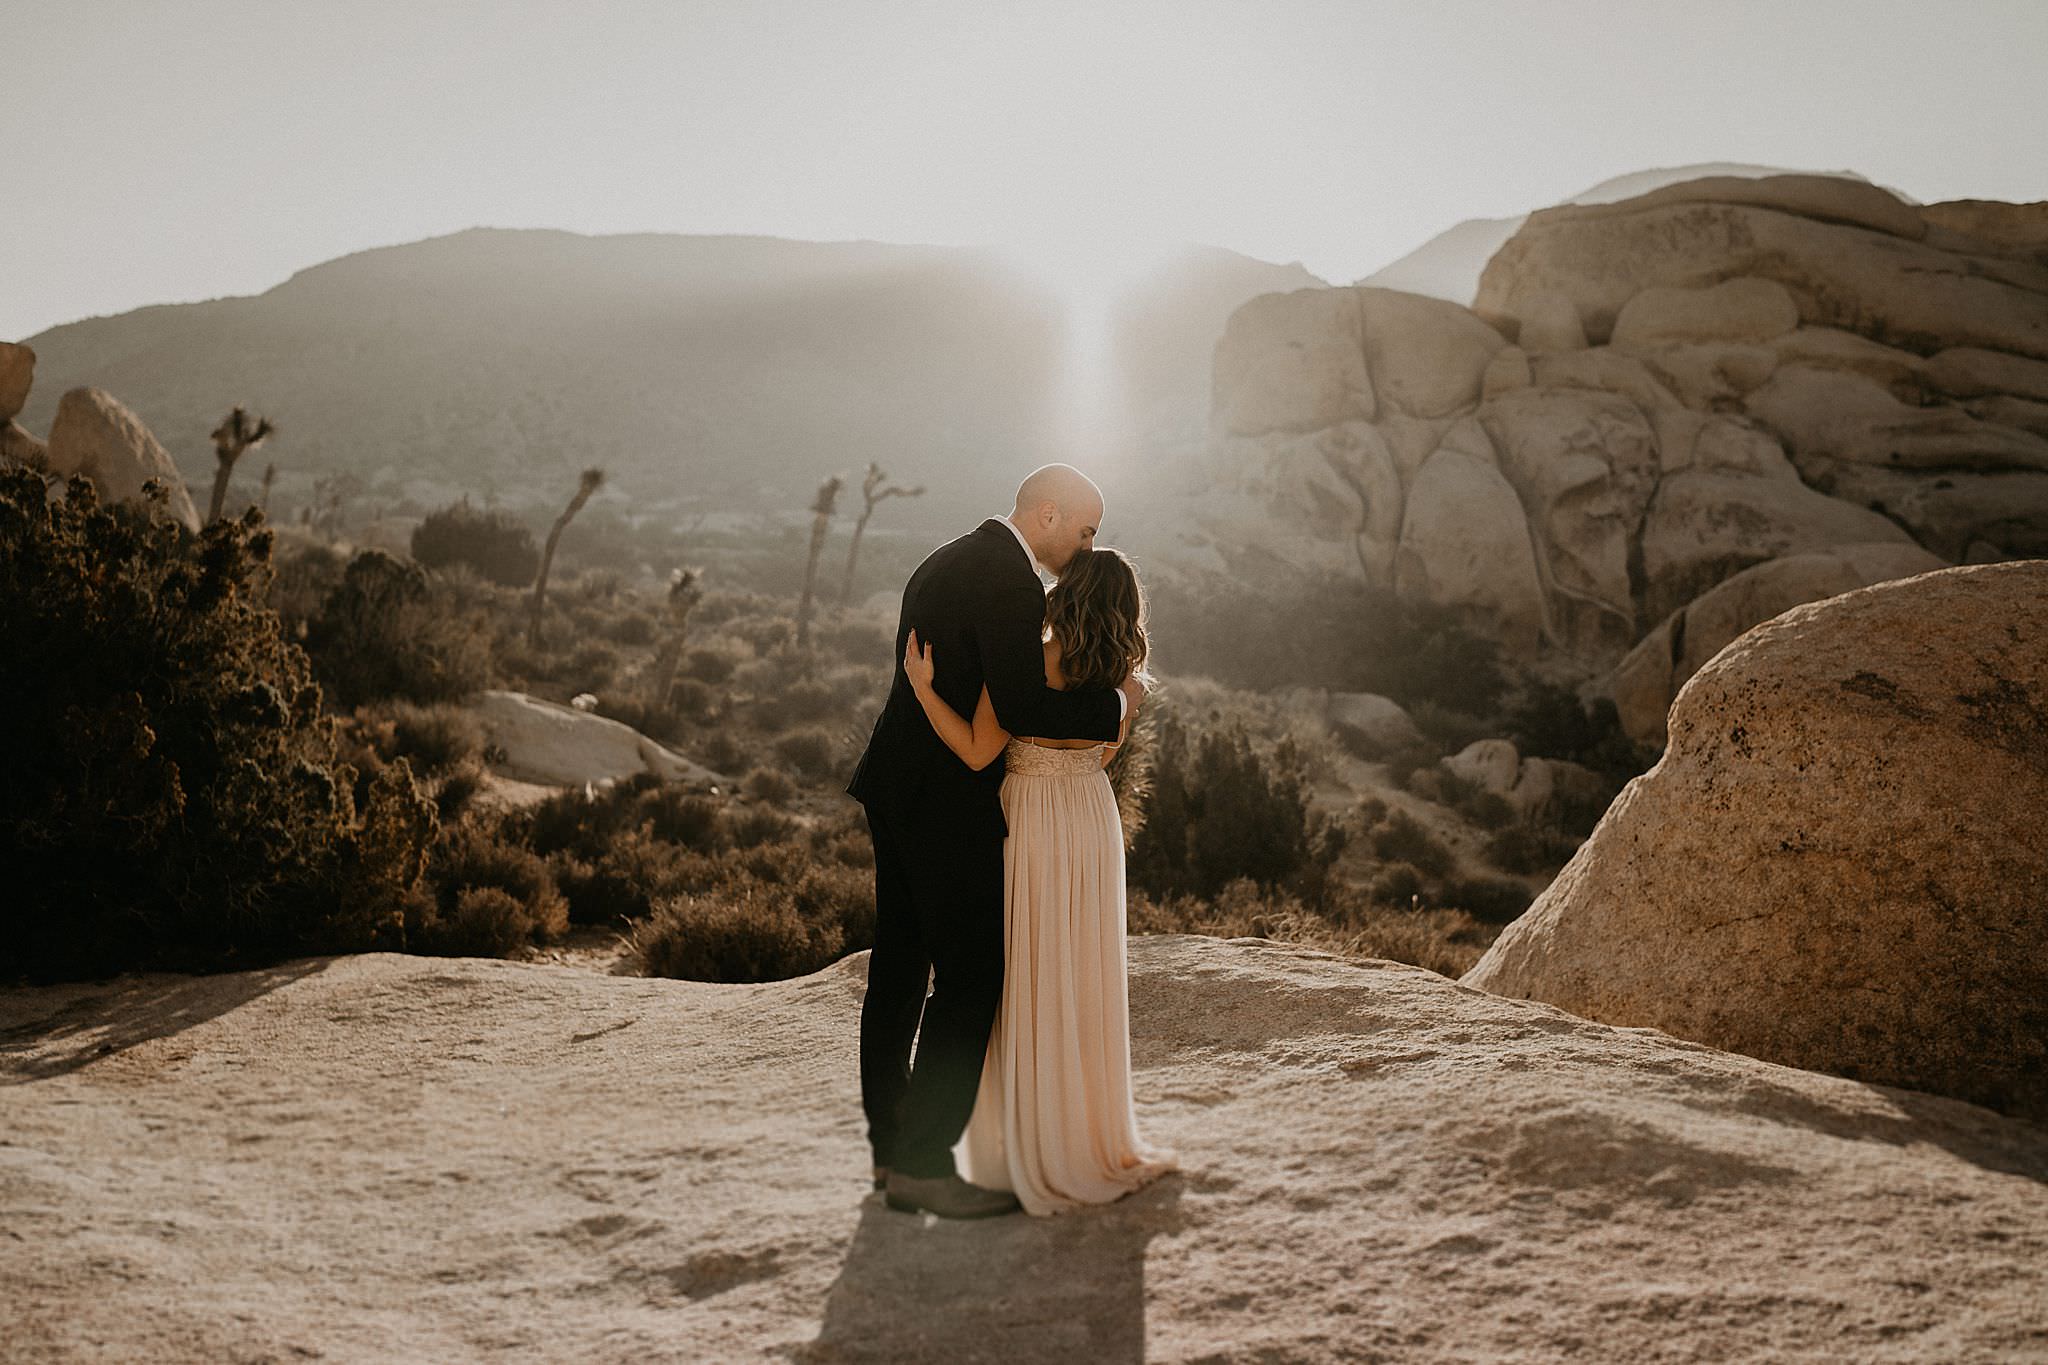 Bride and groom at Joshua Tree national park on their wedding day